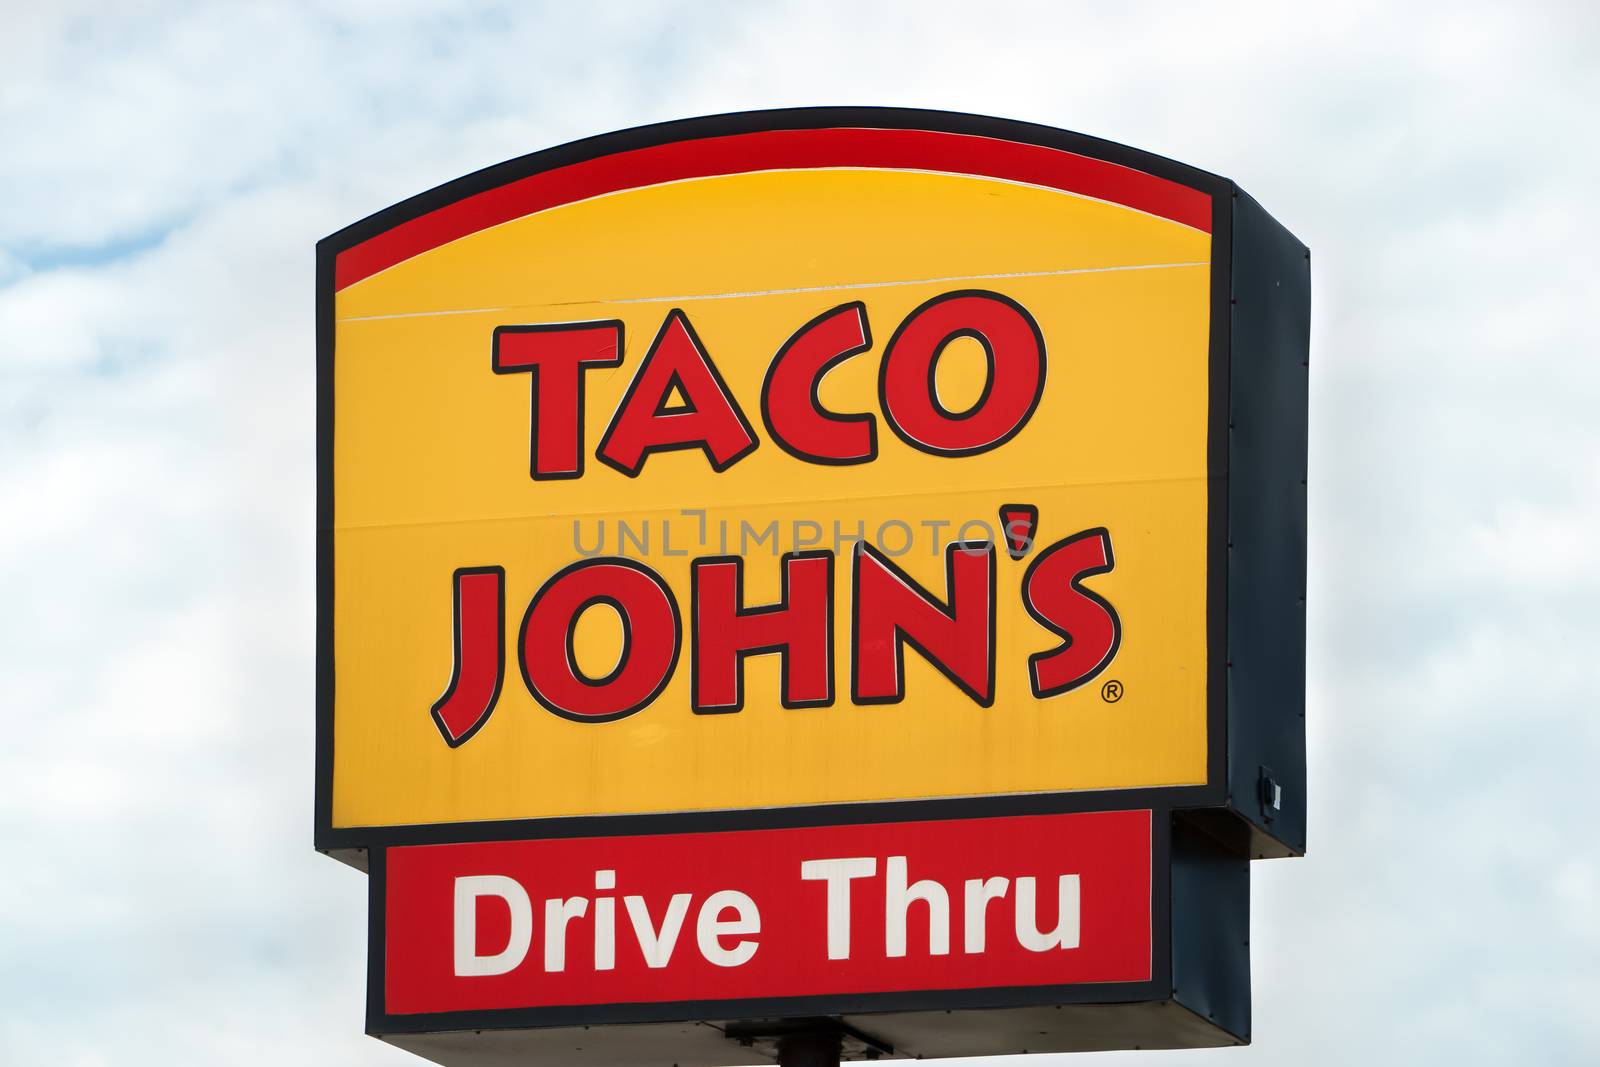 GRINNELL, IA/USA - AUGUST 8, 2015: Taco John's exterior and sign. Taco John's is fast-food restaurant featuring Mexican-inspired fast-food.